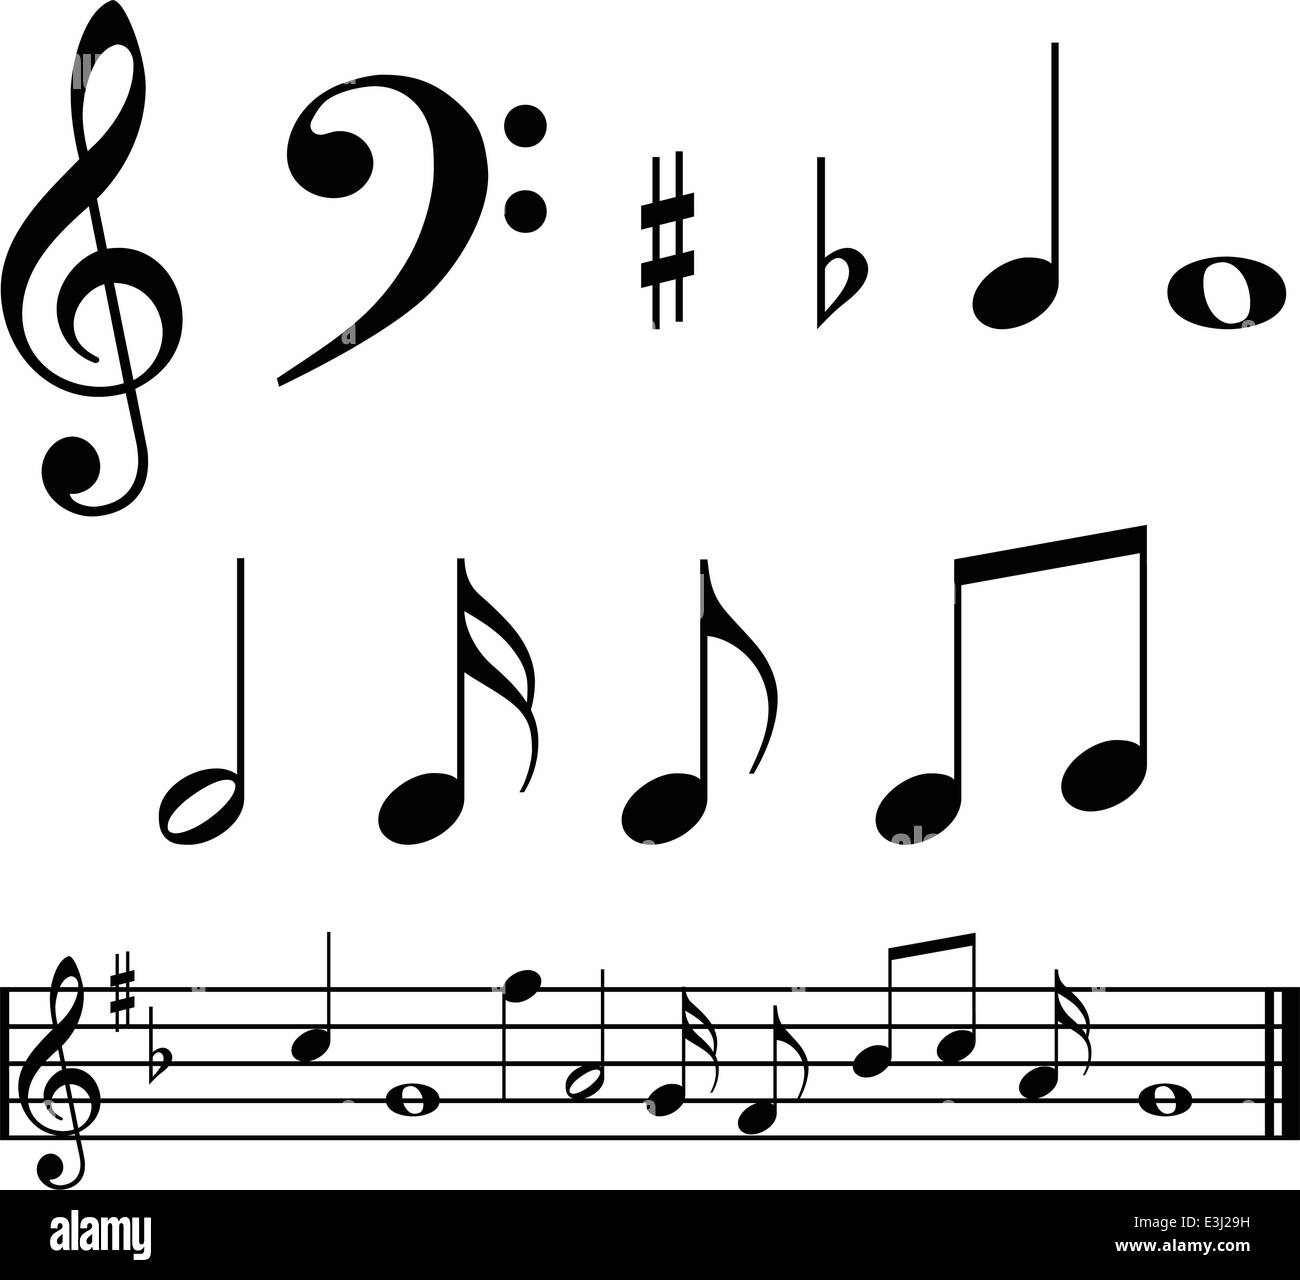 Music notes and symbols with sample music bar Stock Vector